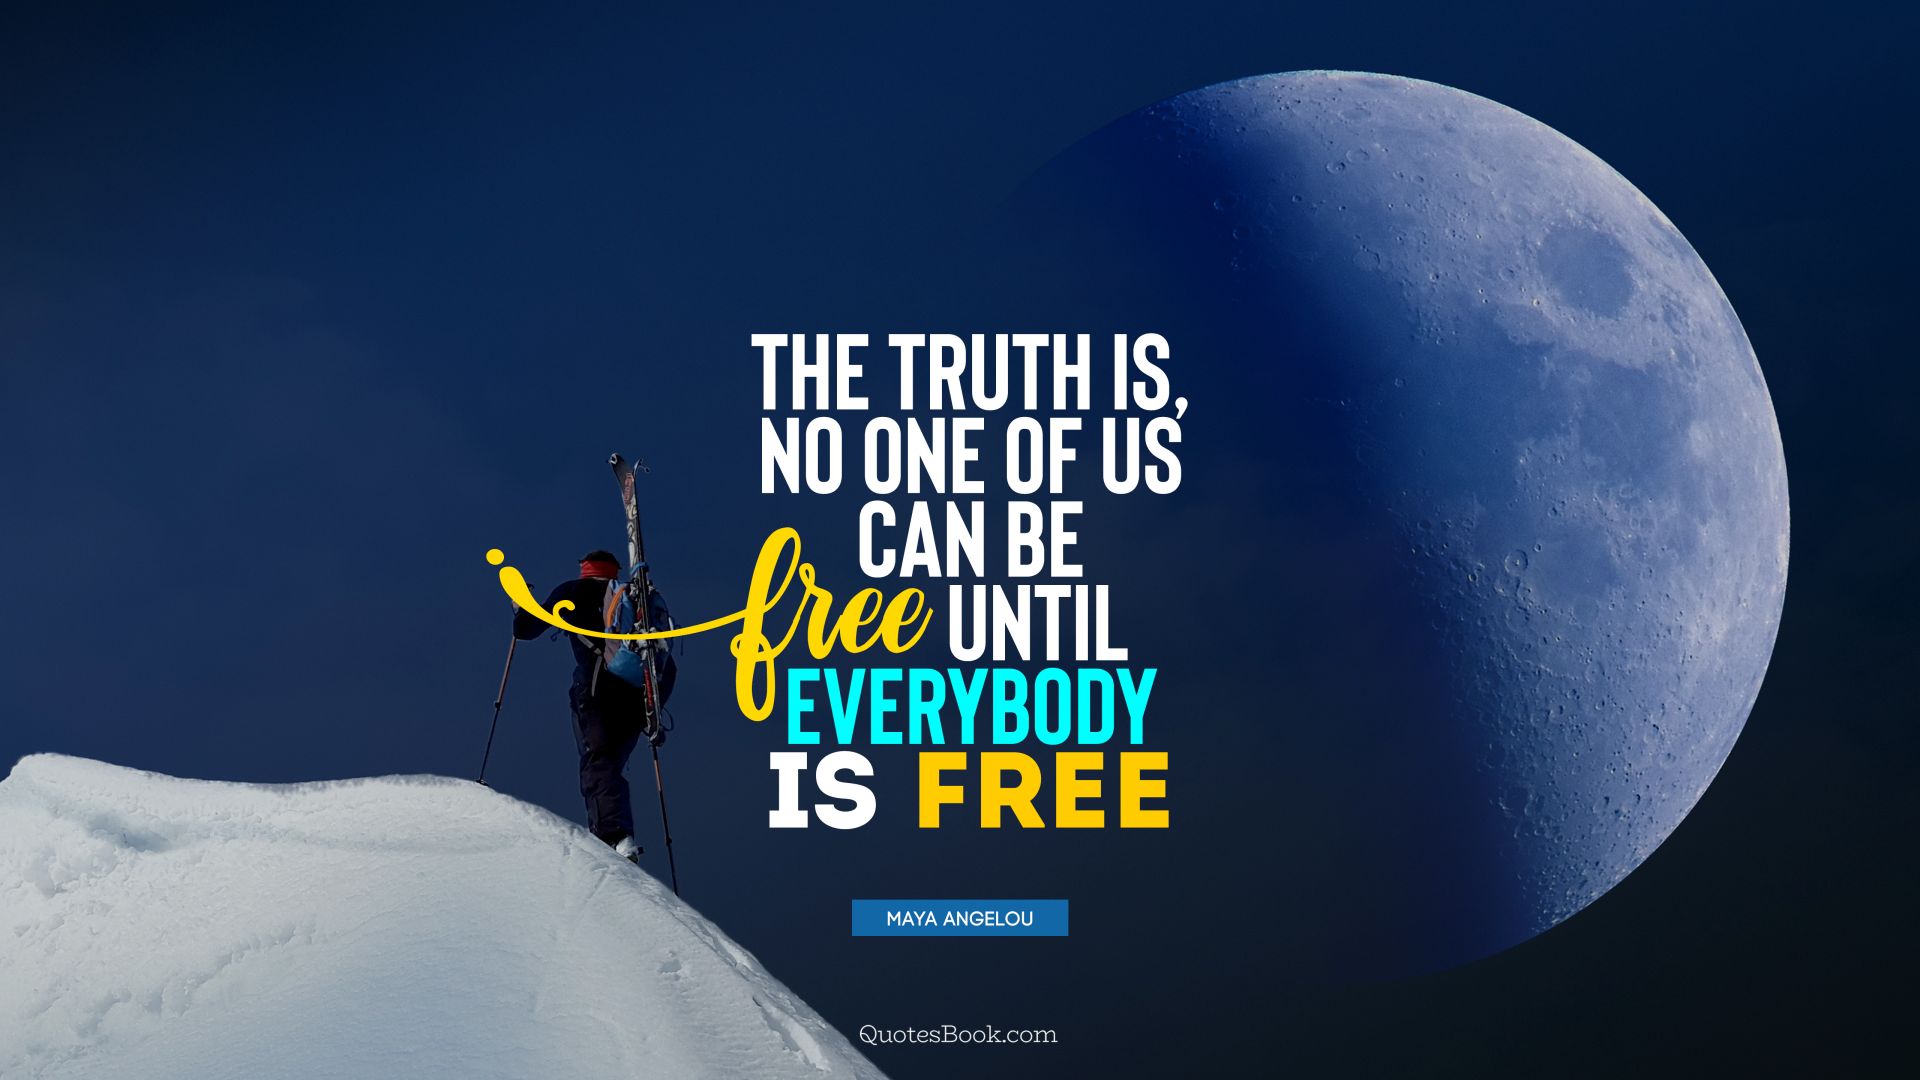 The truth is, no one of us can be free until everybody is free. - Quote by Maya Angelou